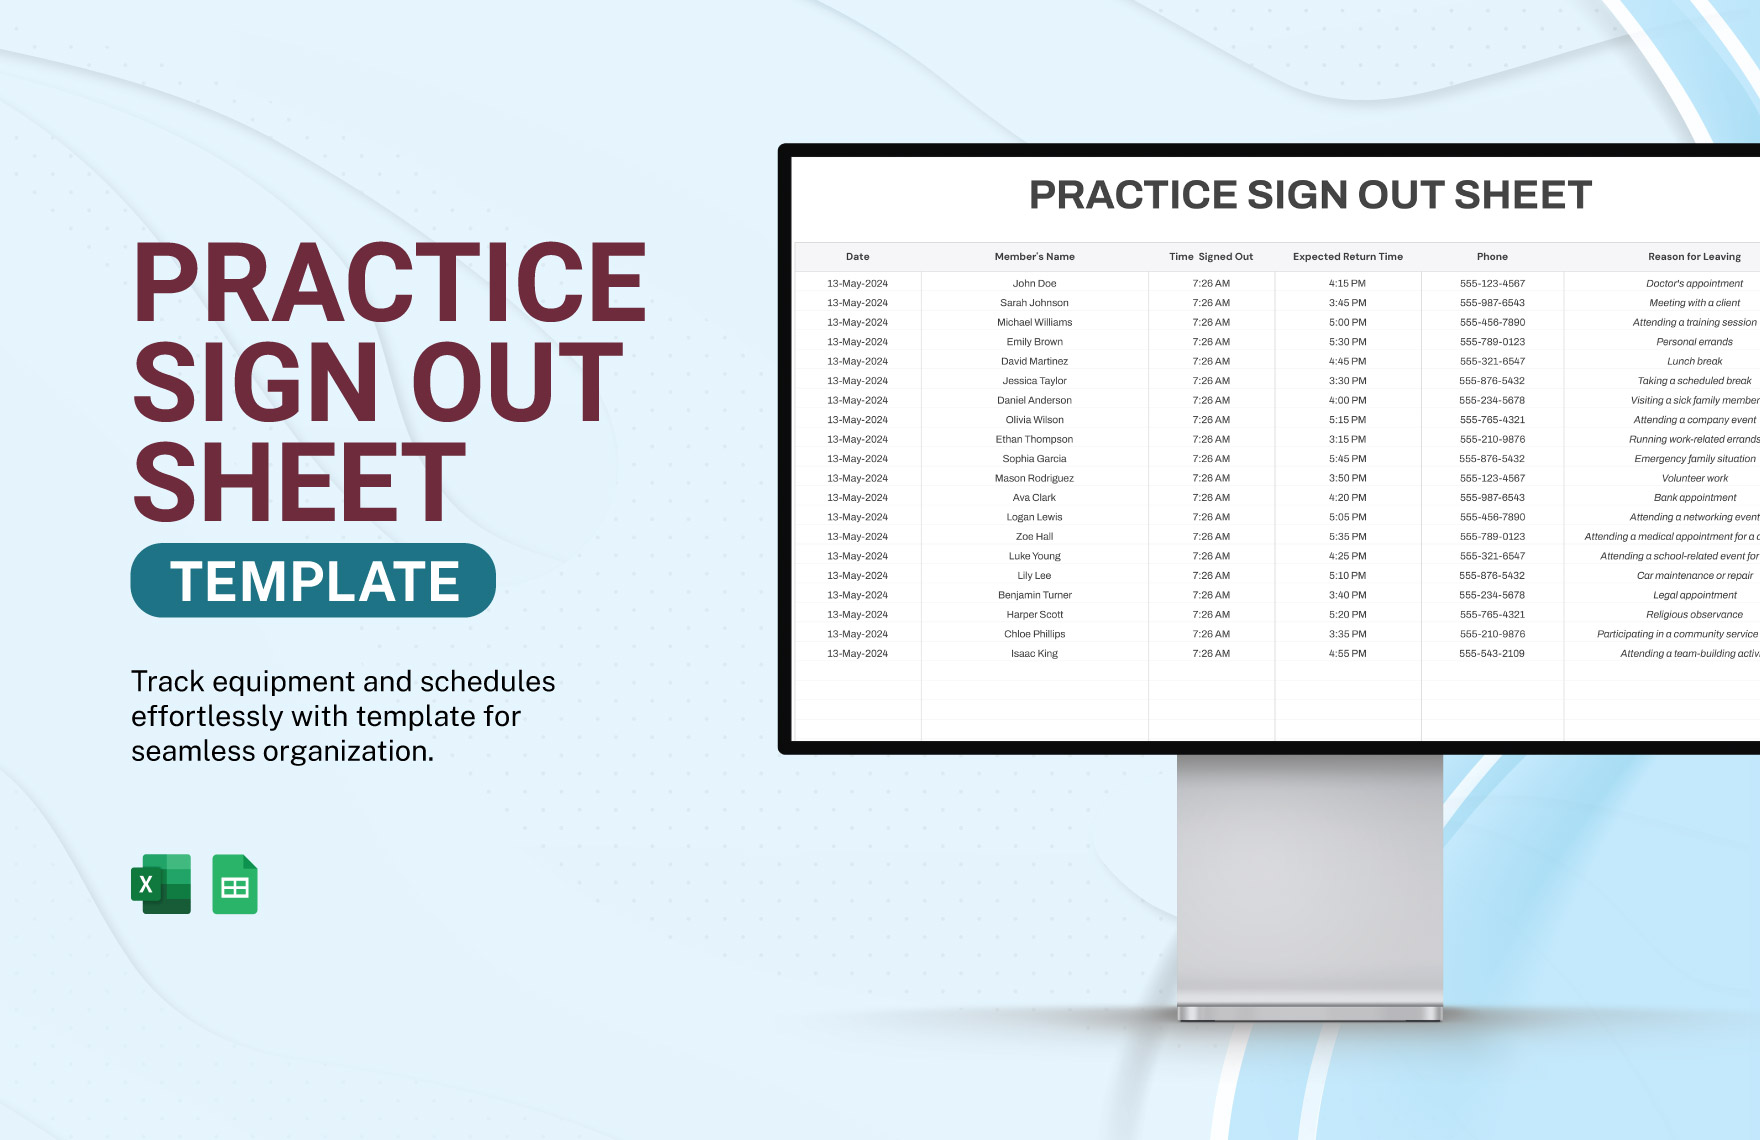 Practice Sign out Sheet Template in Excel, Google Sheets